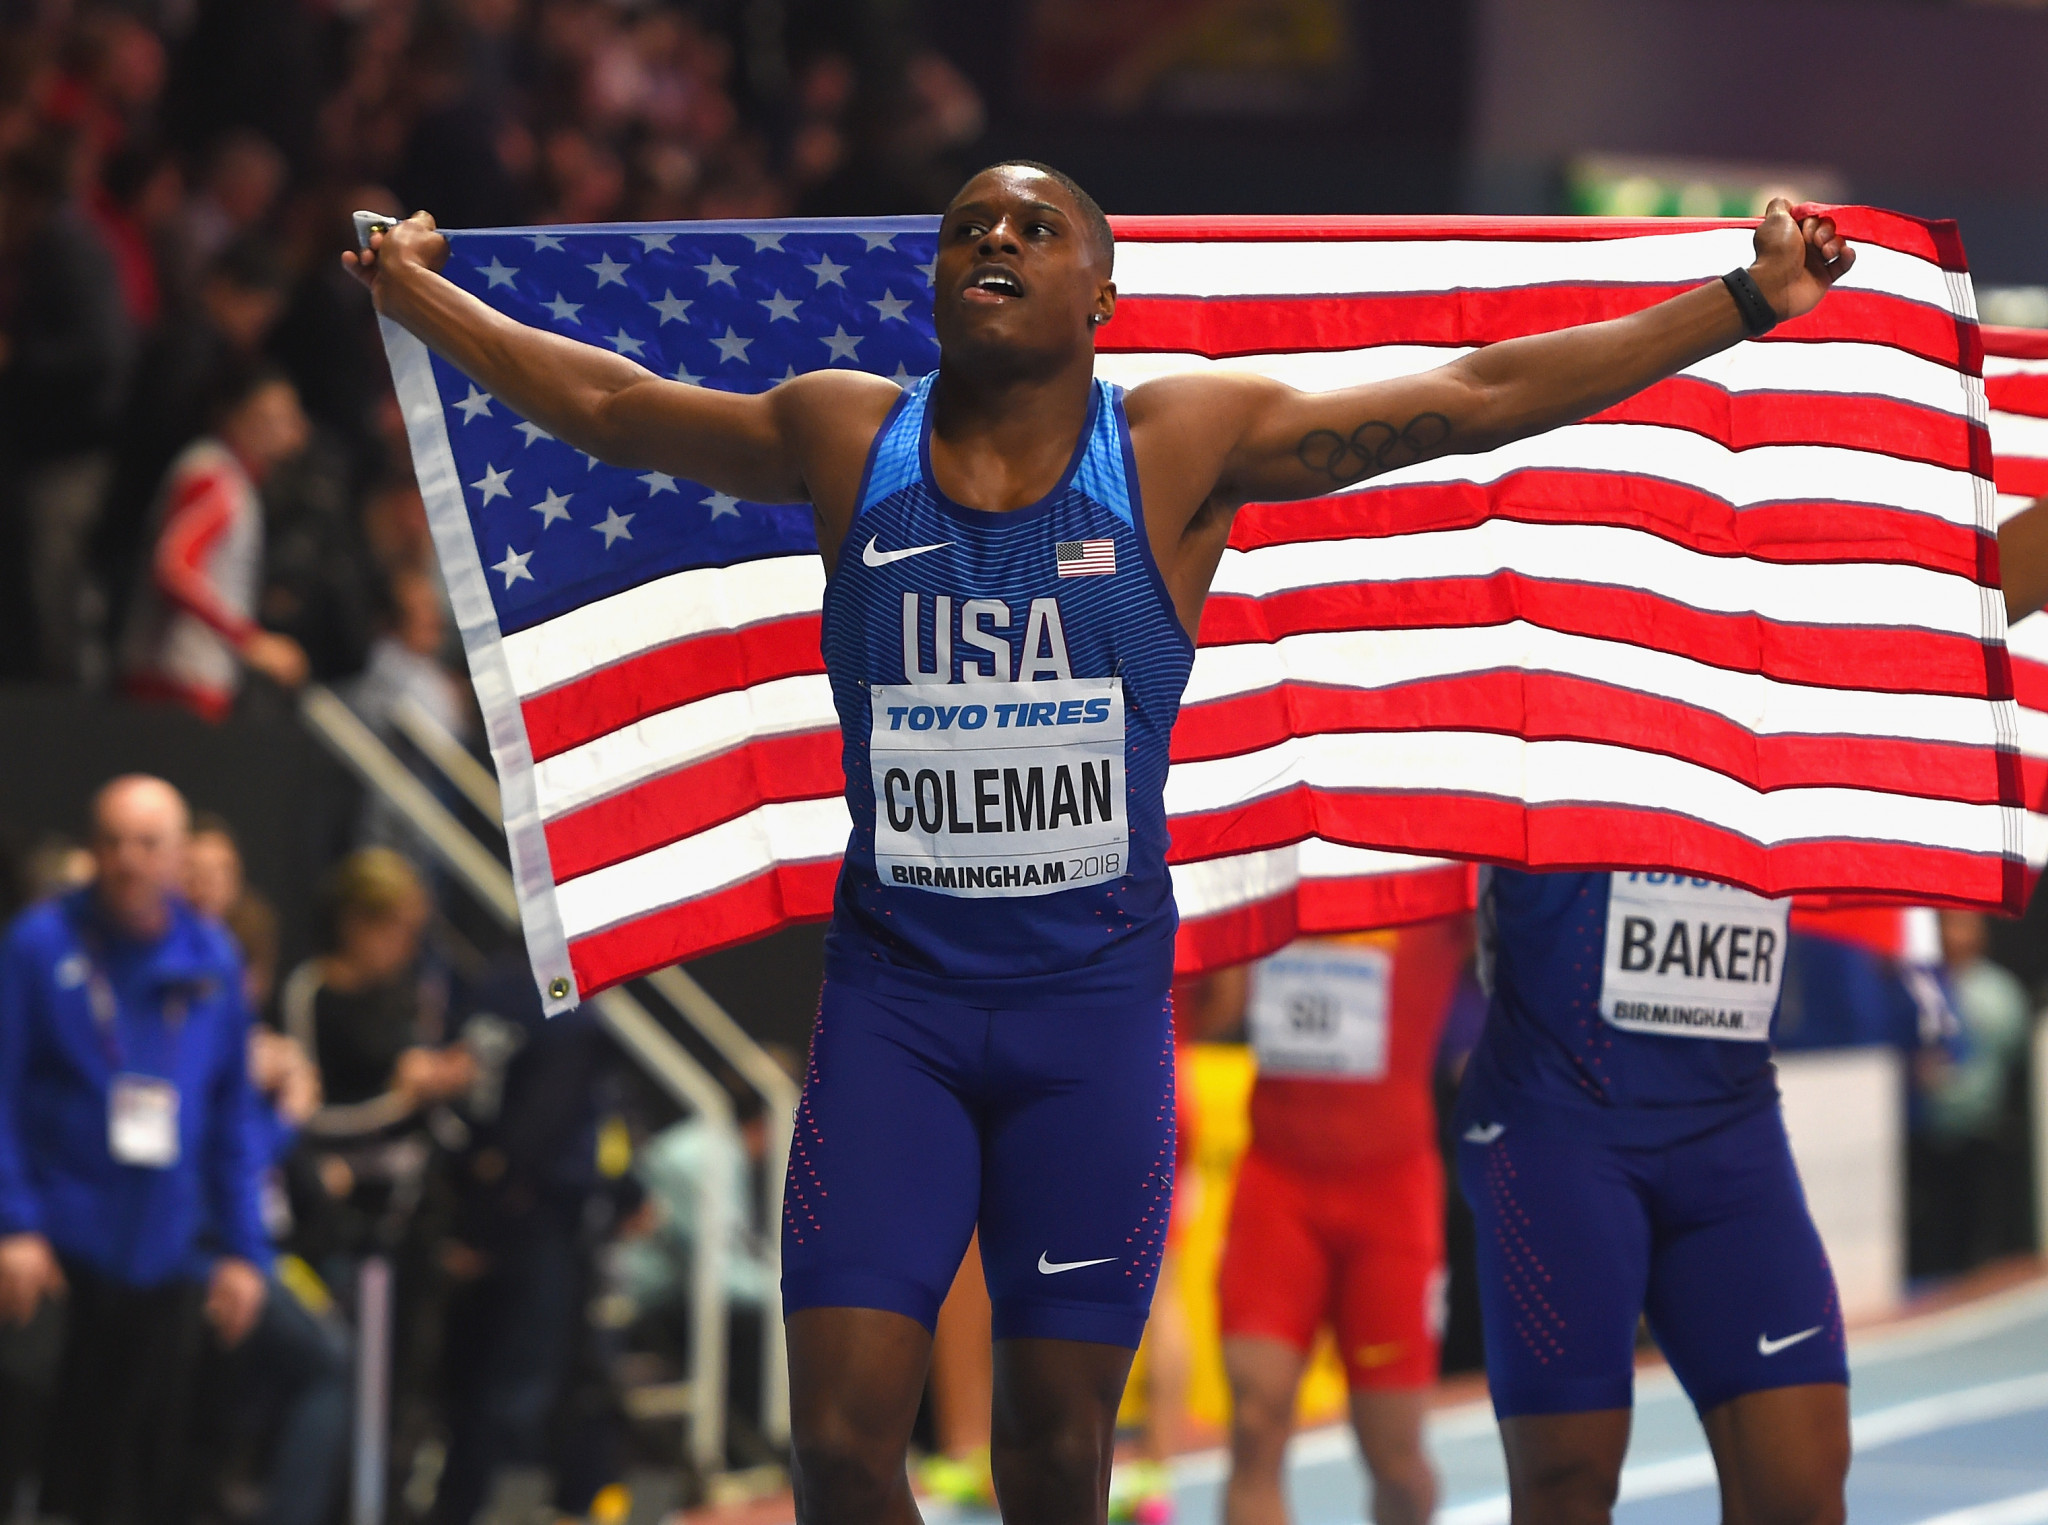 Christian Coleman claimed his first major title with victory in the 60m at the IAAF World Indoor Championships in Birmingham ©Getty Images